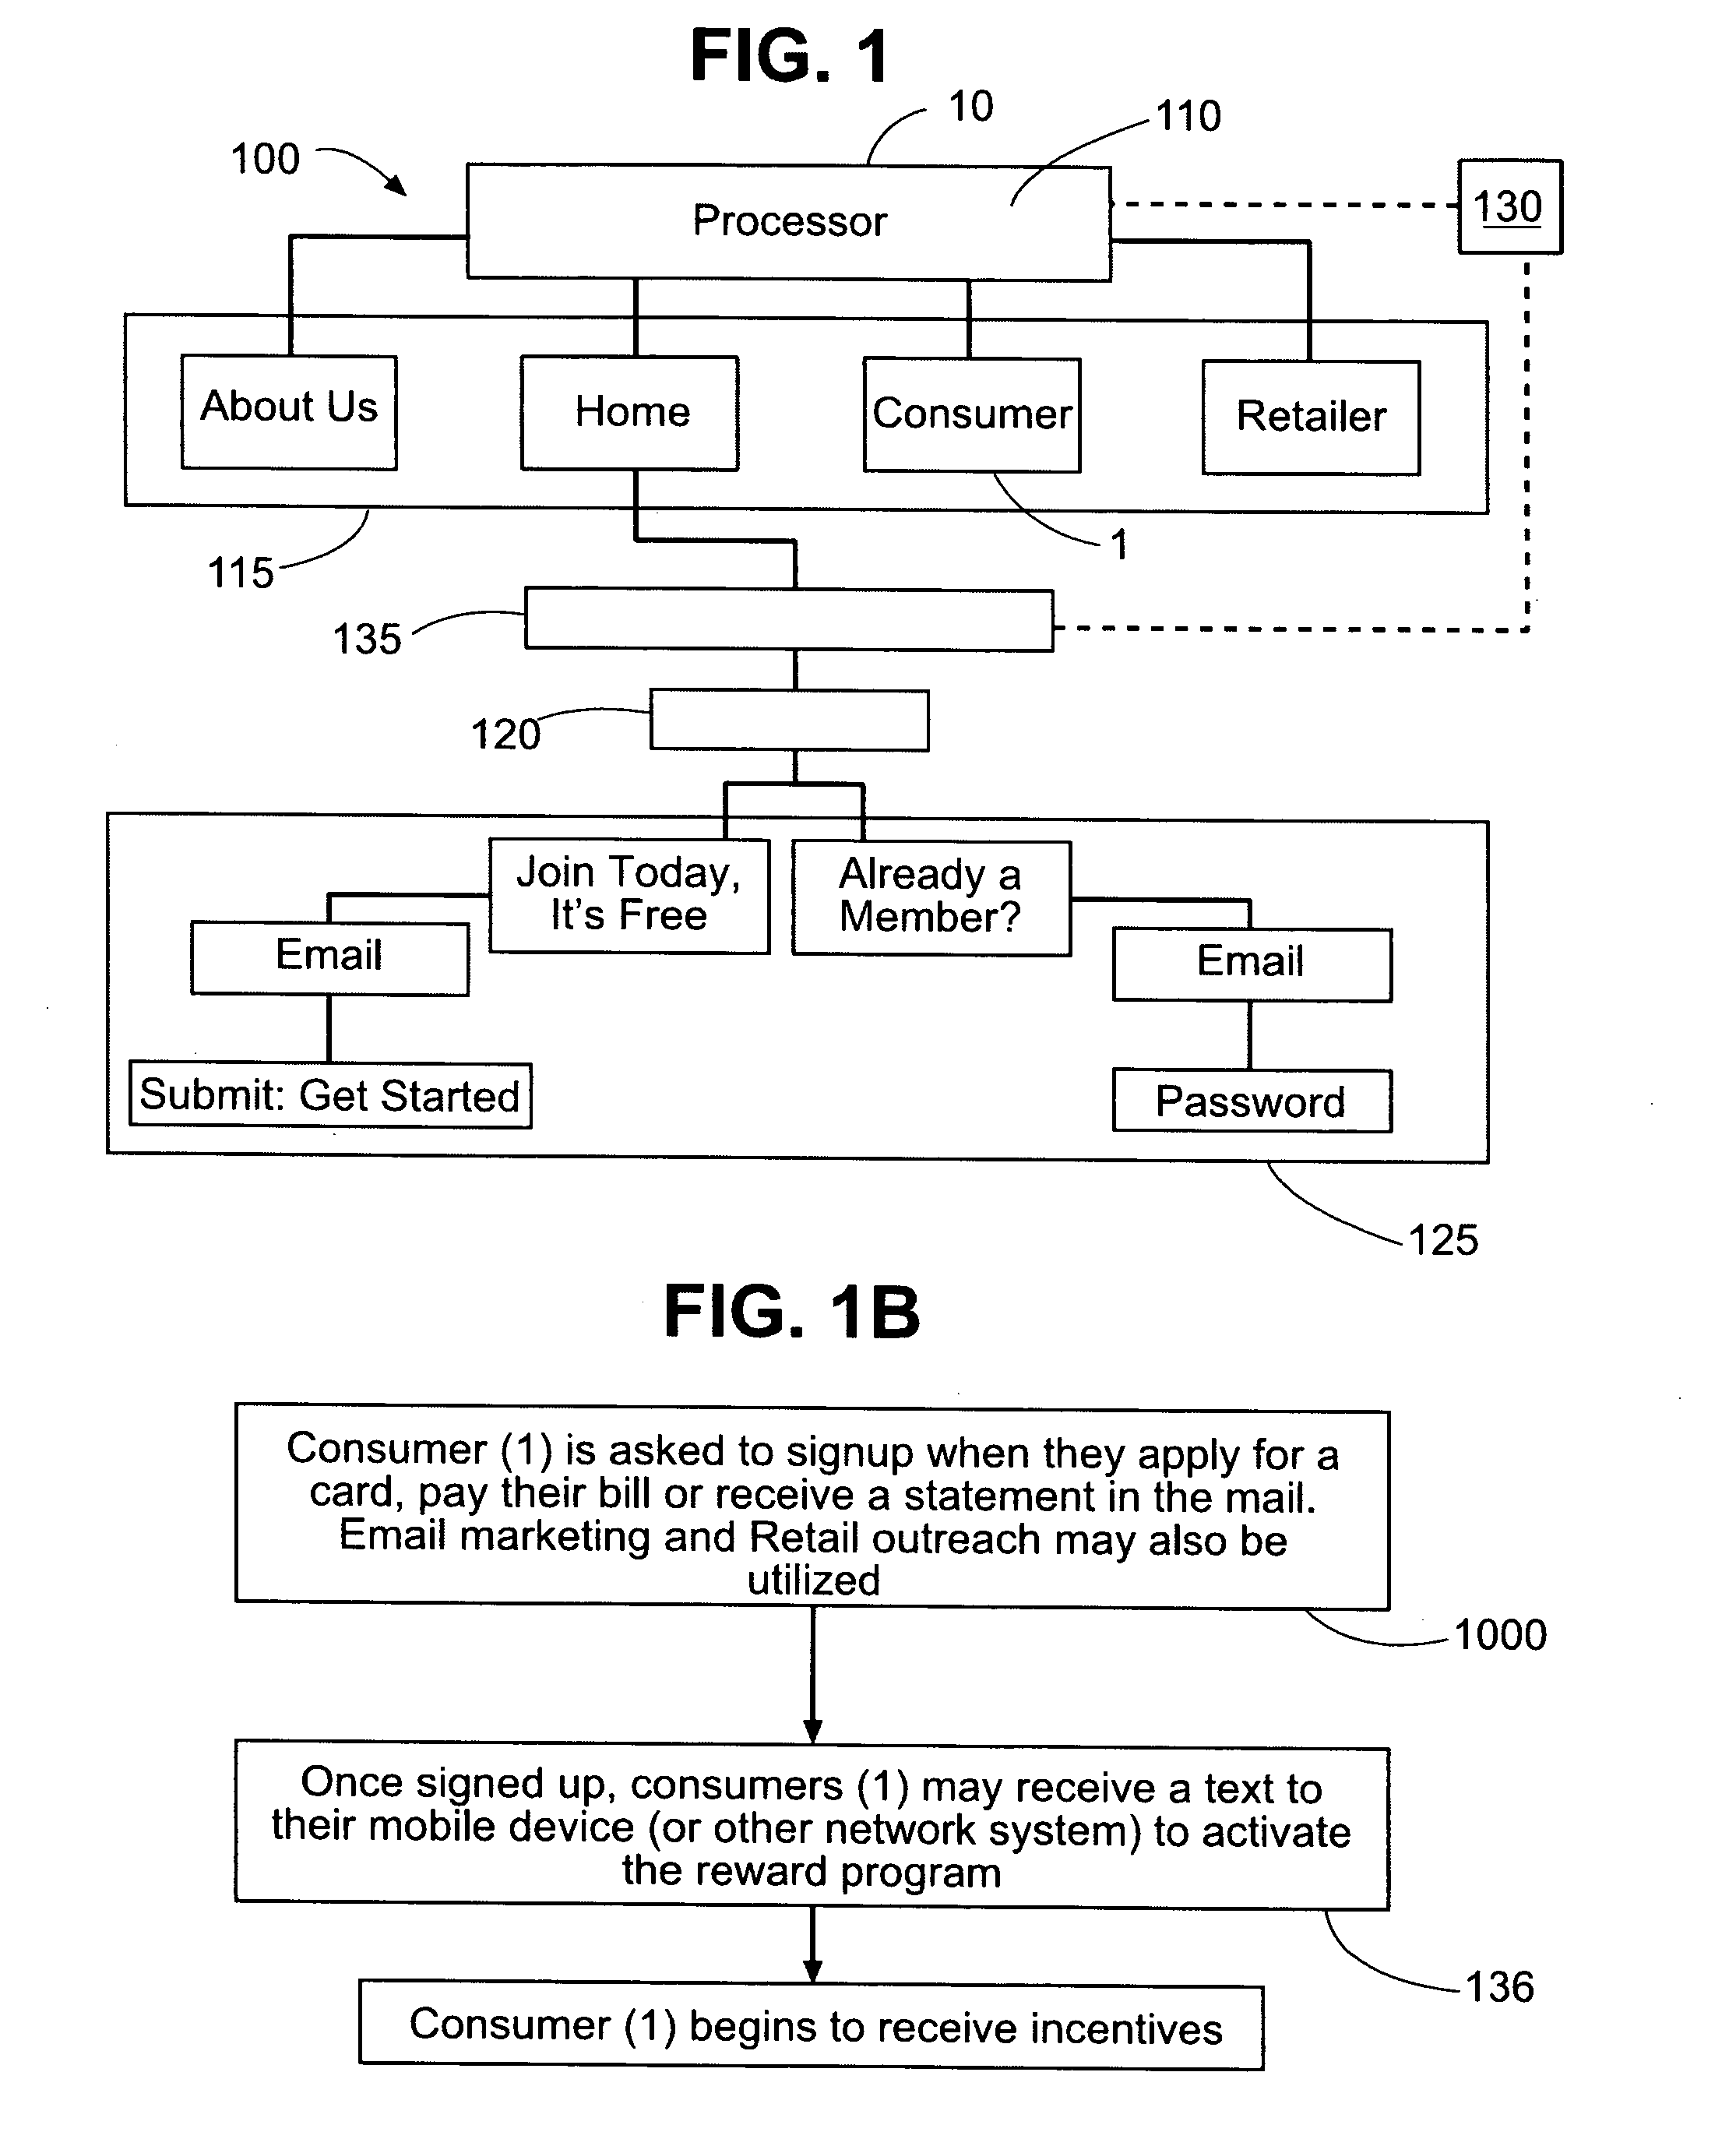 Electronic coupon system and data mining and use thereof in relation thereto and for use interactive participation of individuals and groups within the system